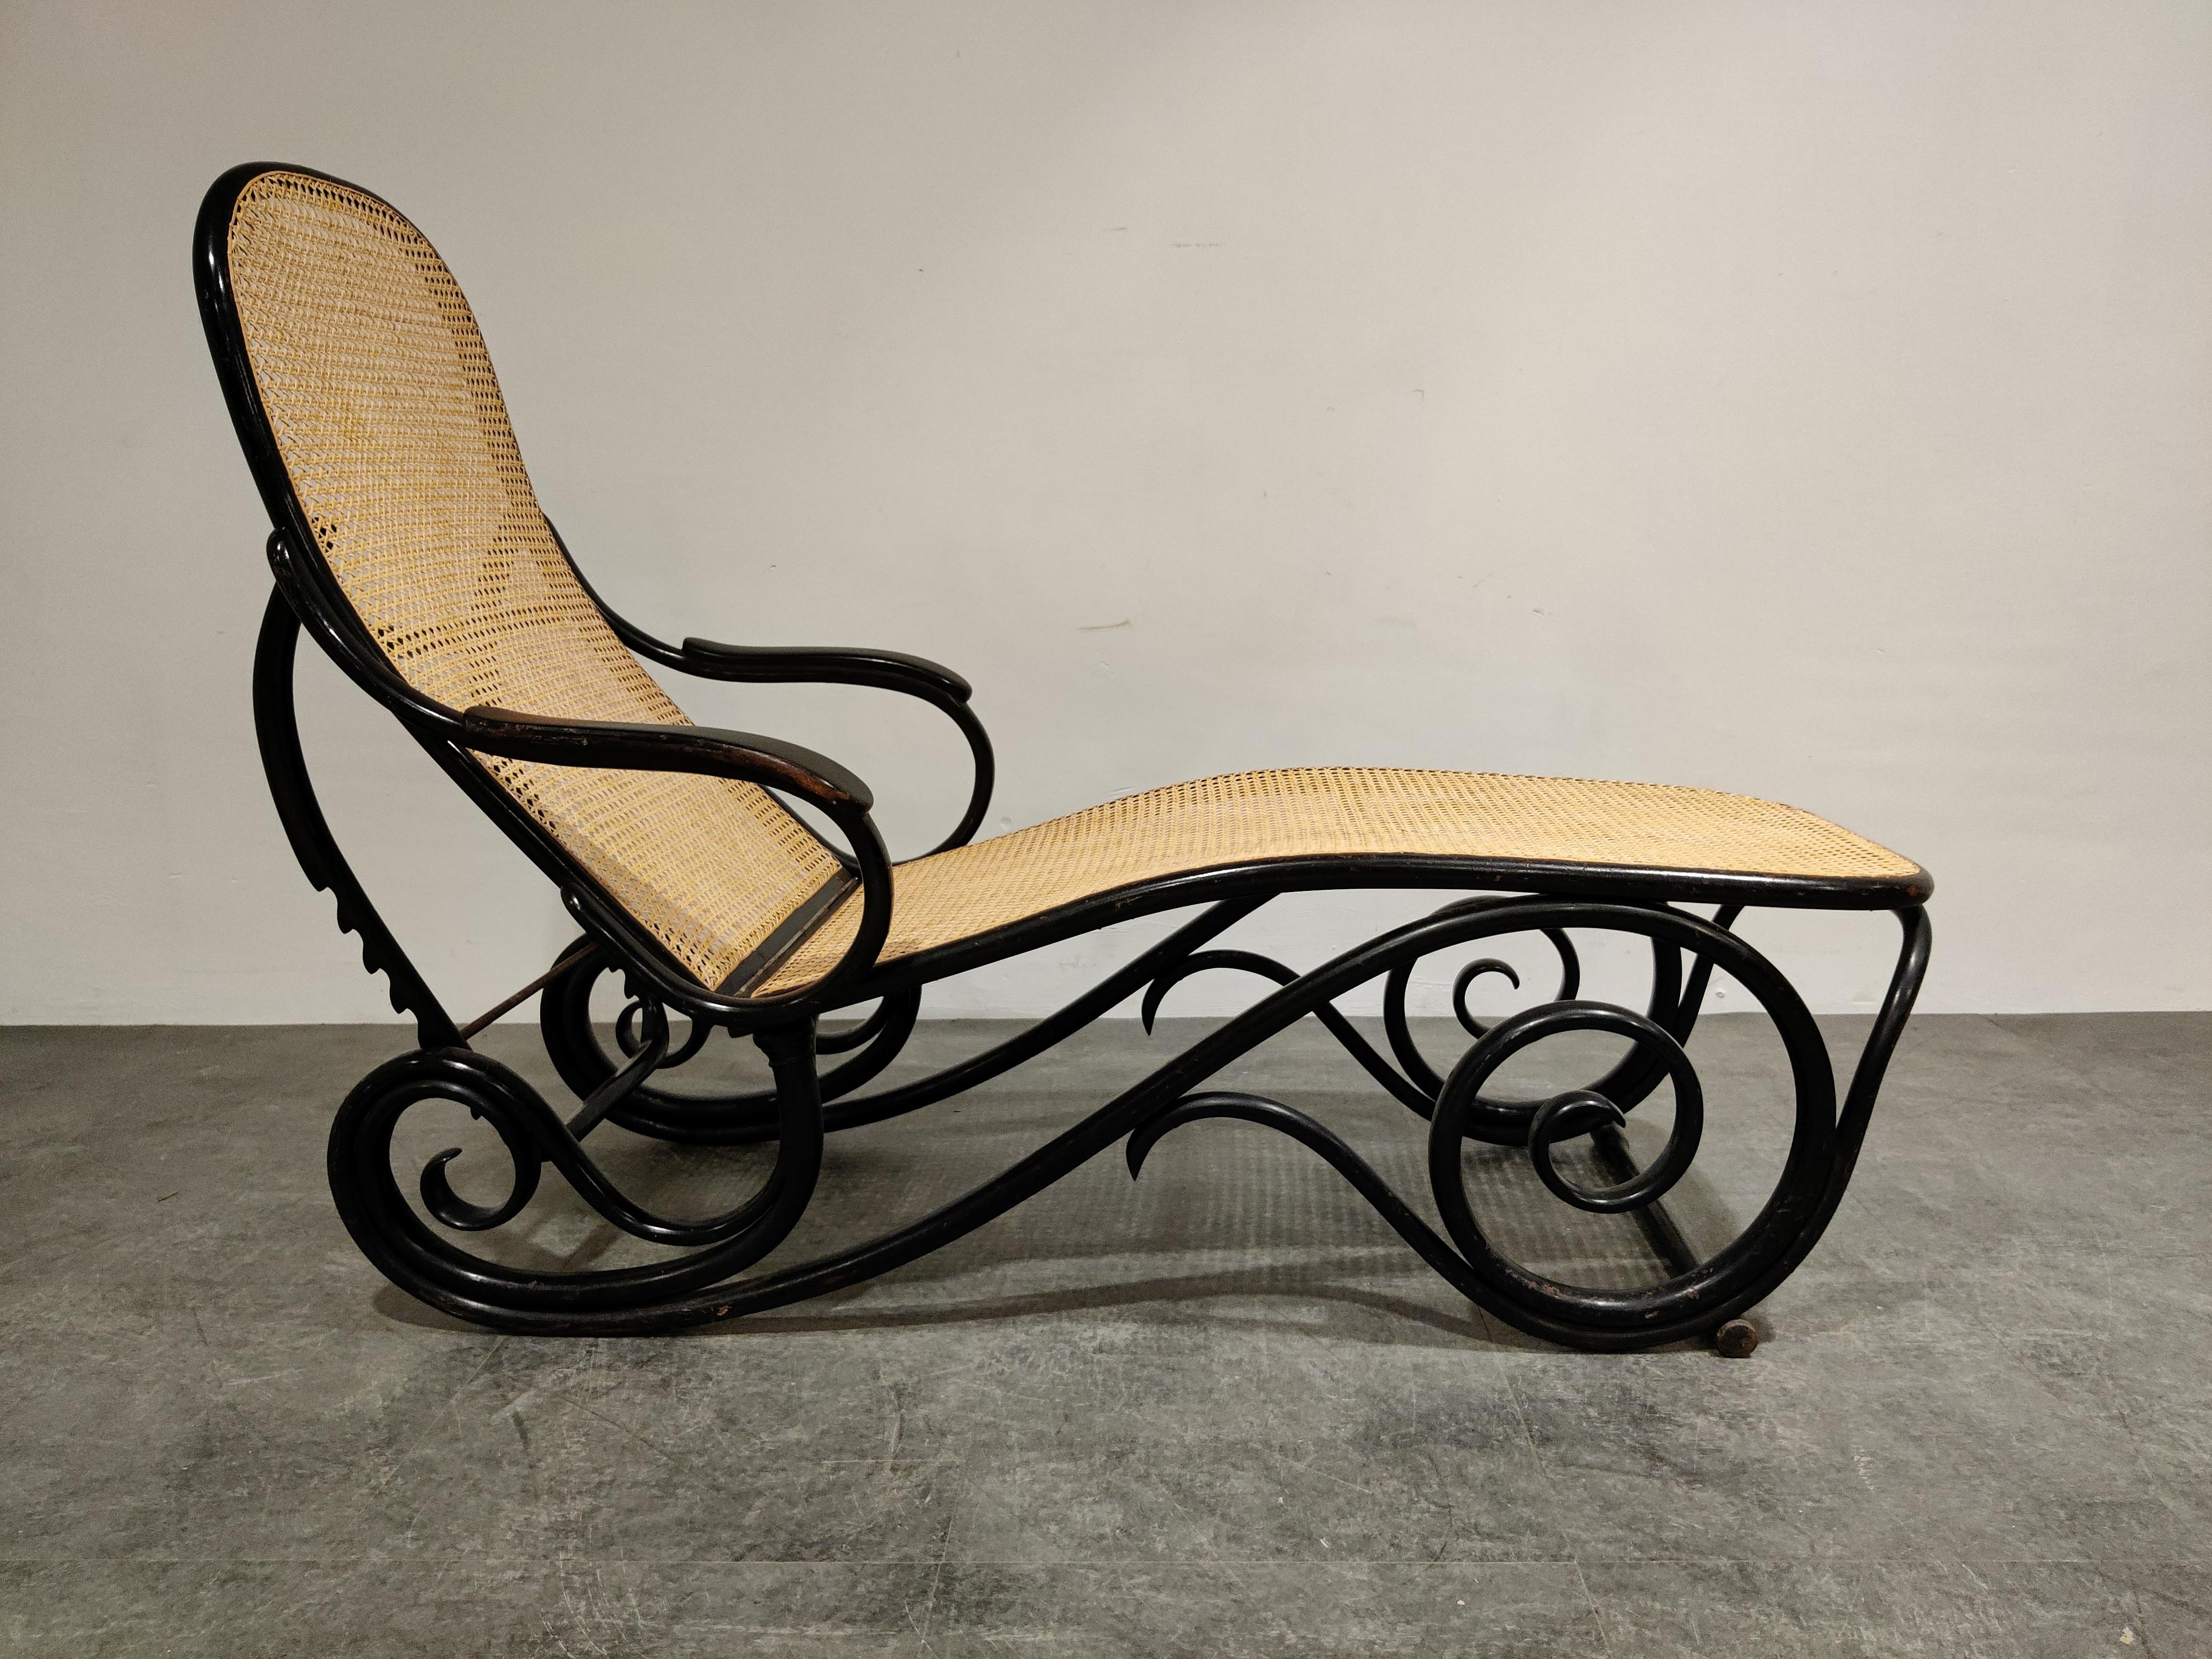 Antique bentwood chaise longue by Michael Thonet for Thonet Wien.

This is found in Thonet catalogues from 1914 and earlier.

The chair has an adjustable backrest.

1920s, Austria

Good condition, new webbing but frame has been left